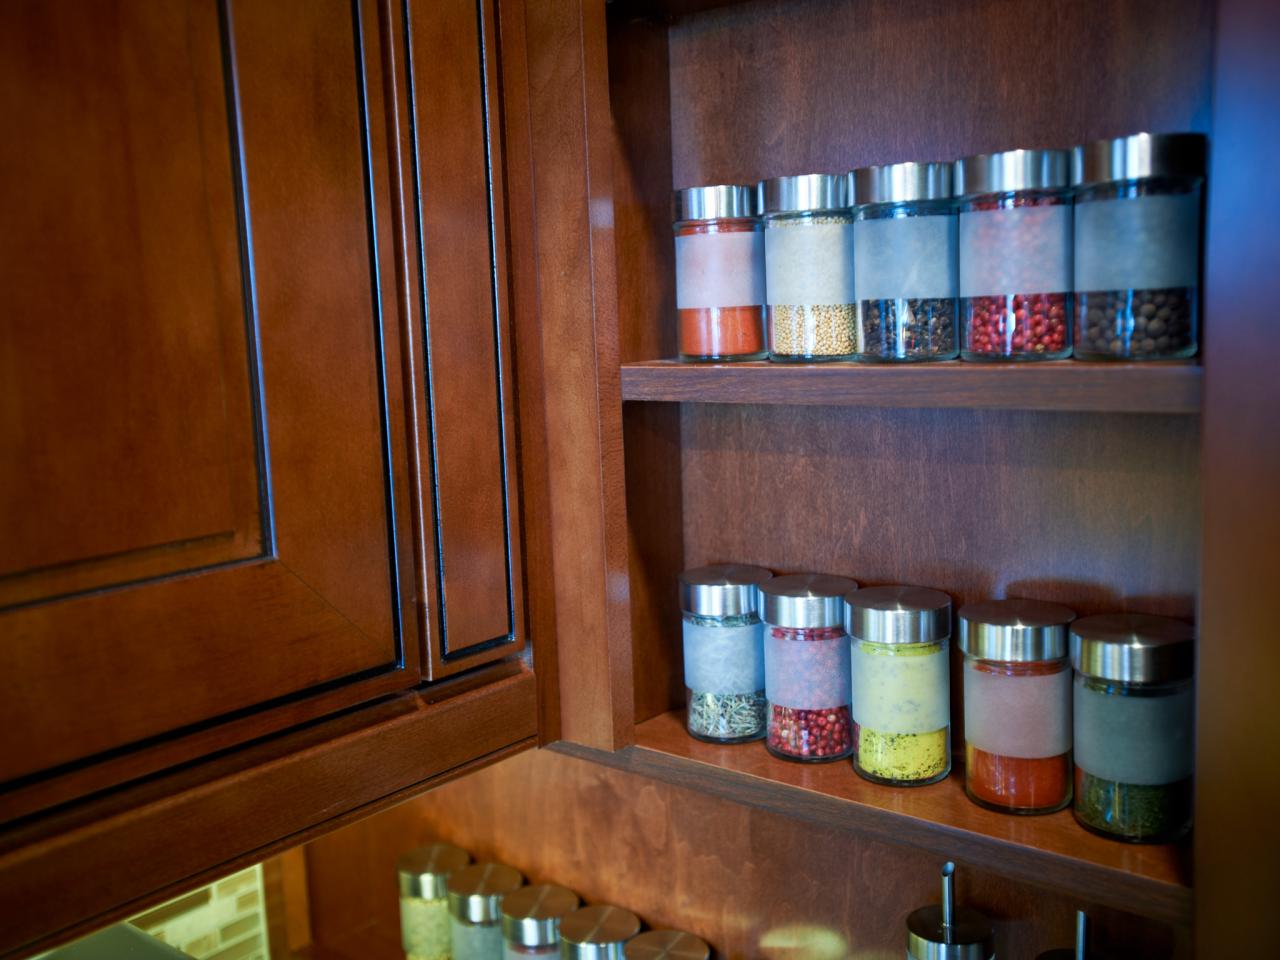 Spice Racks For Cabinets Pictures, Spice Storage For Kitchen Cabinets